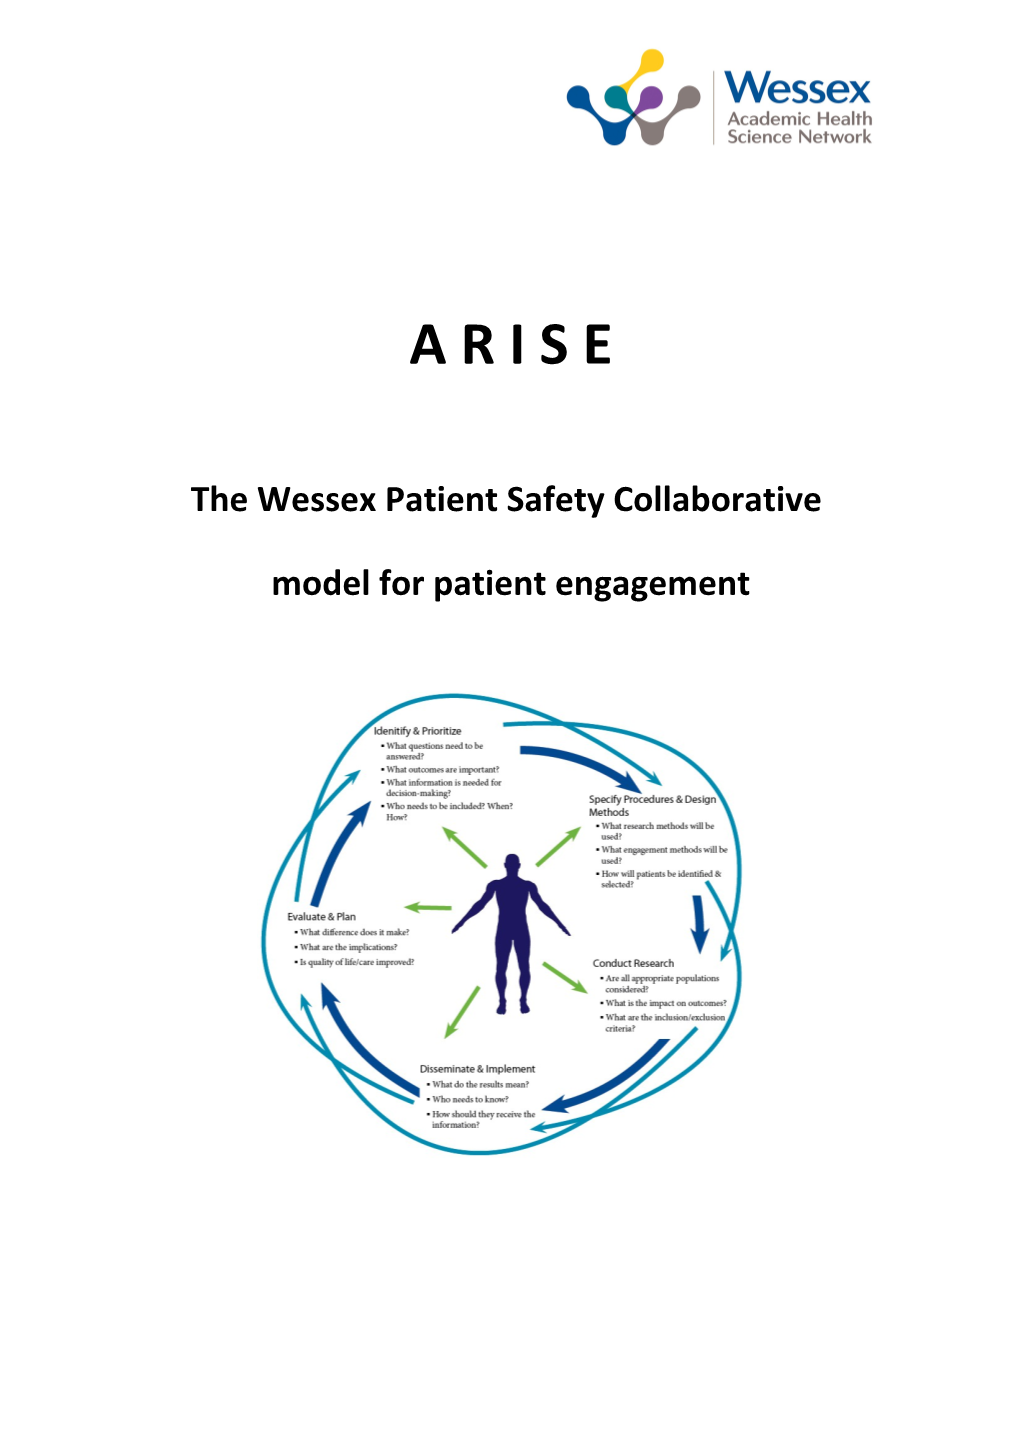 The Wessex Patient Safety Collaborative